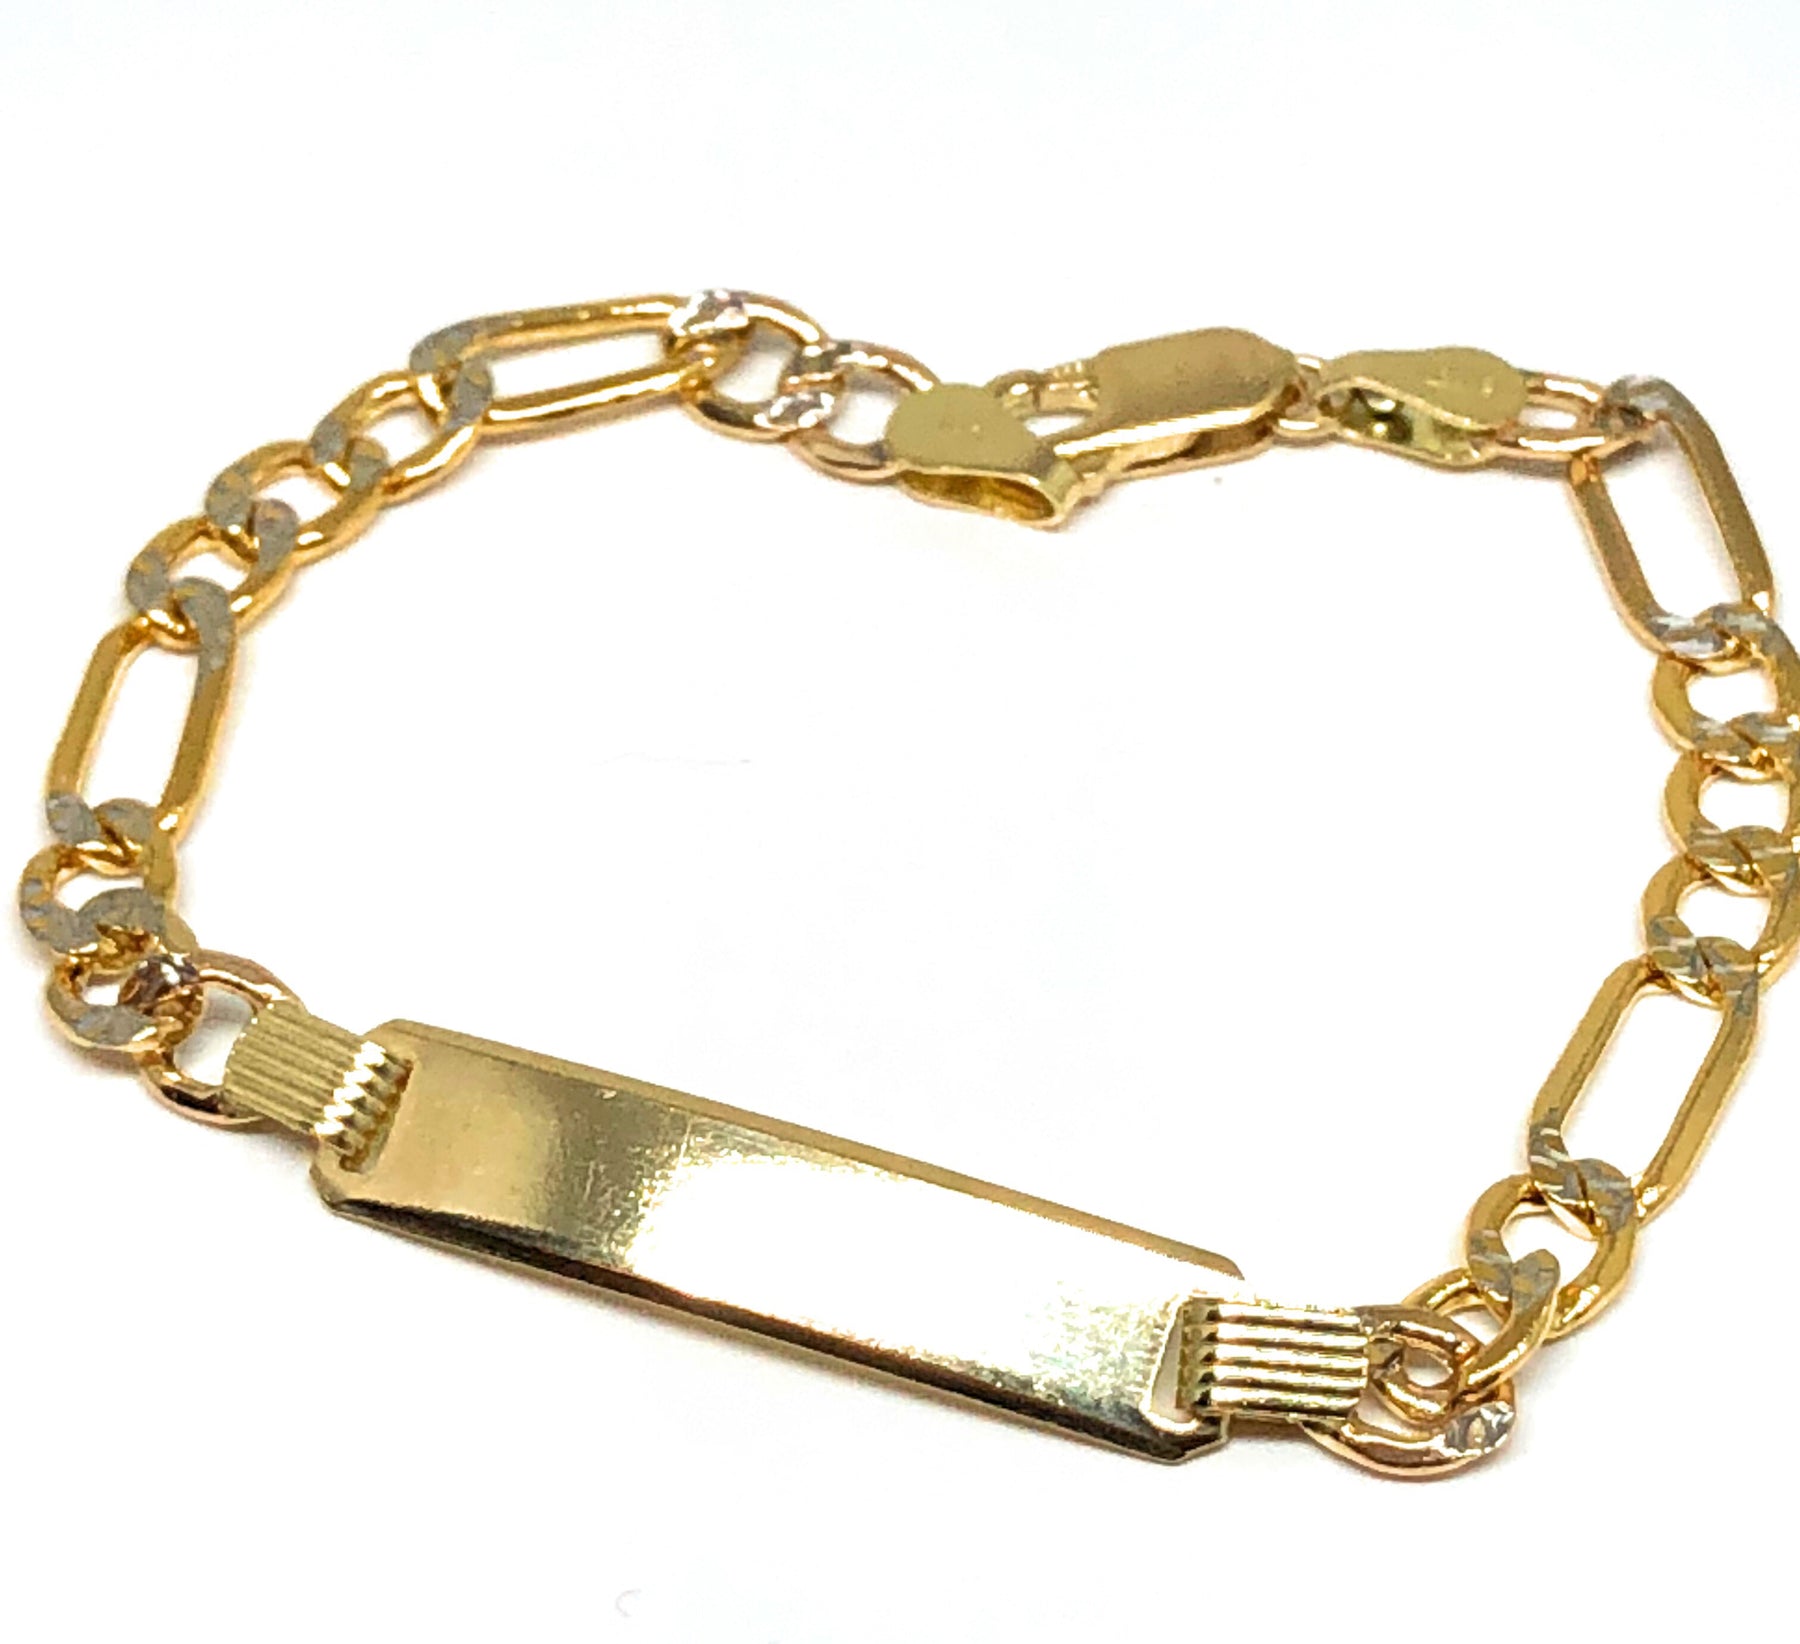 Shop 10K Yellow Gold Oval Tag ID Bracelet for Kids at Taylor's Jewellers